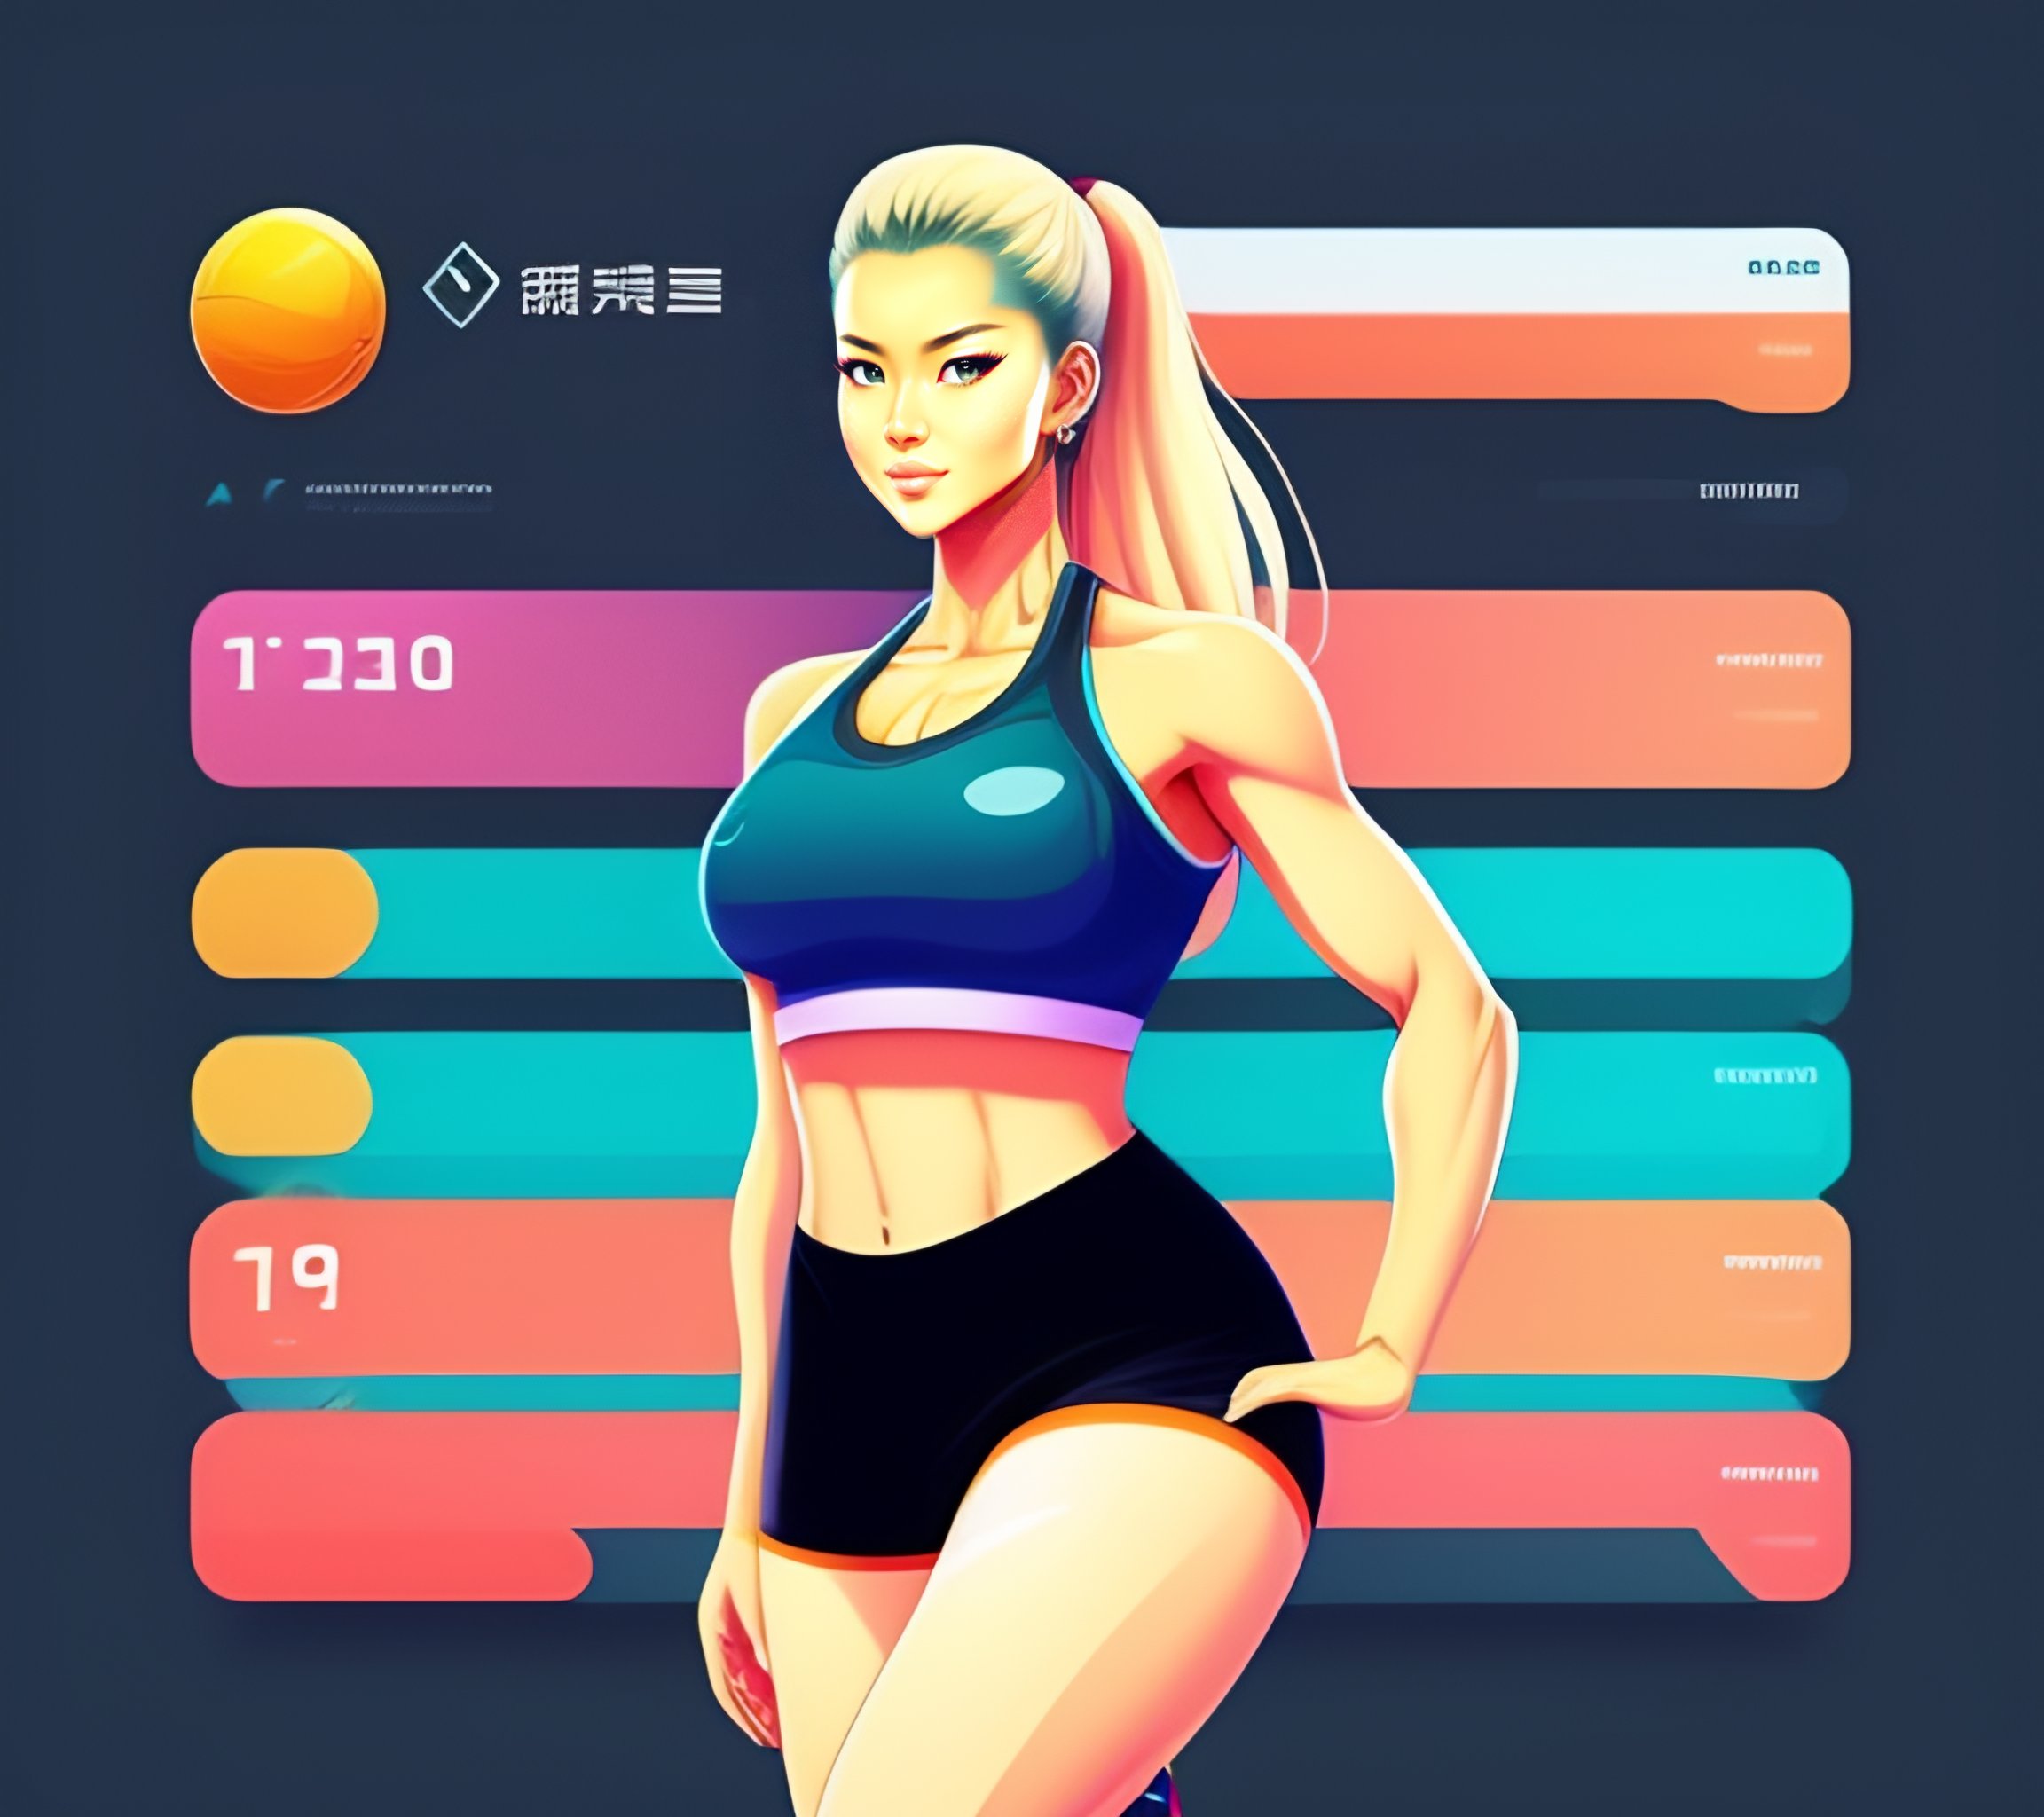 Lexica - A woman in a sports bra top and shorts, featured on dribble,  superflat, dynamic pose, behance hd, flat shading, blond, app icon